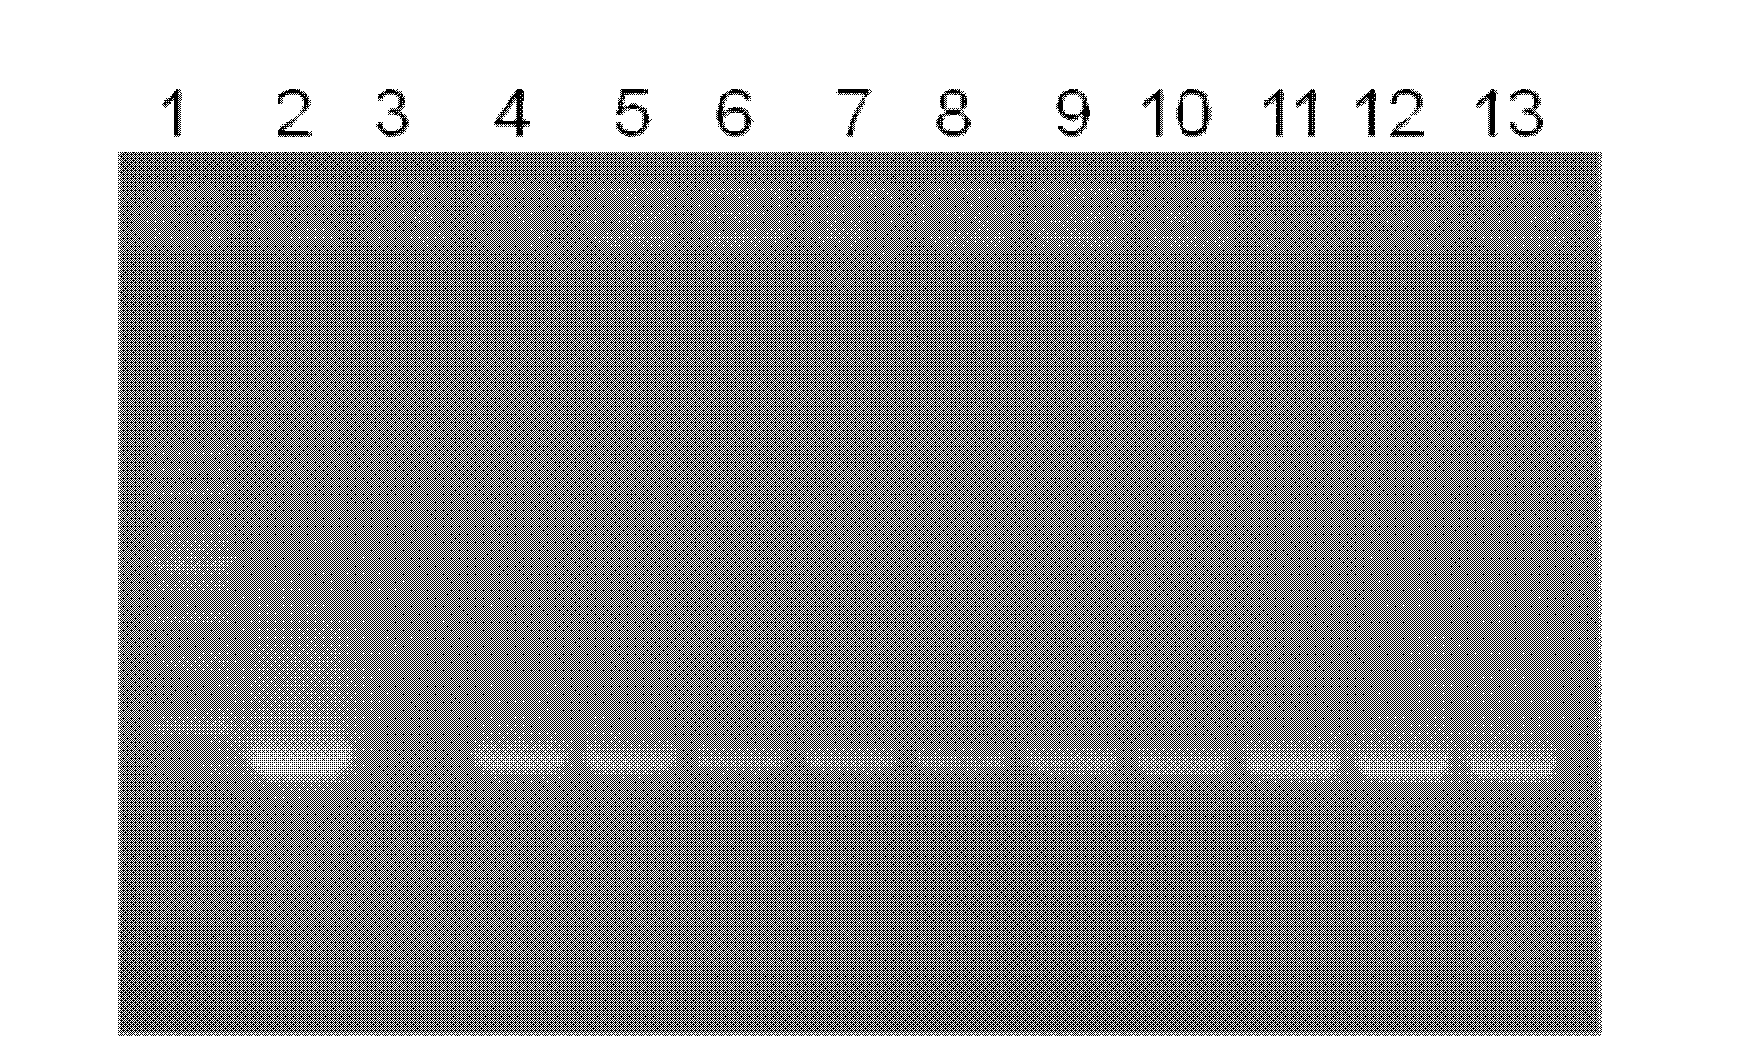 Plant dwarfing related protein GA2ox, and encoding gene and application thereof